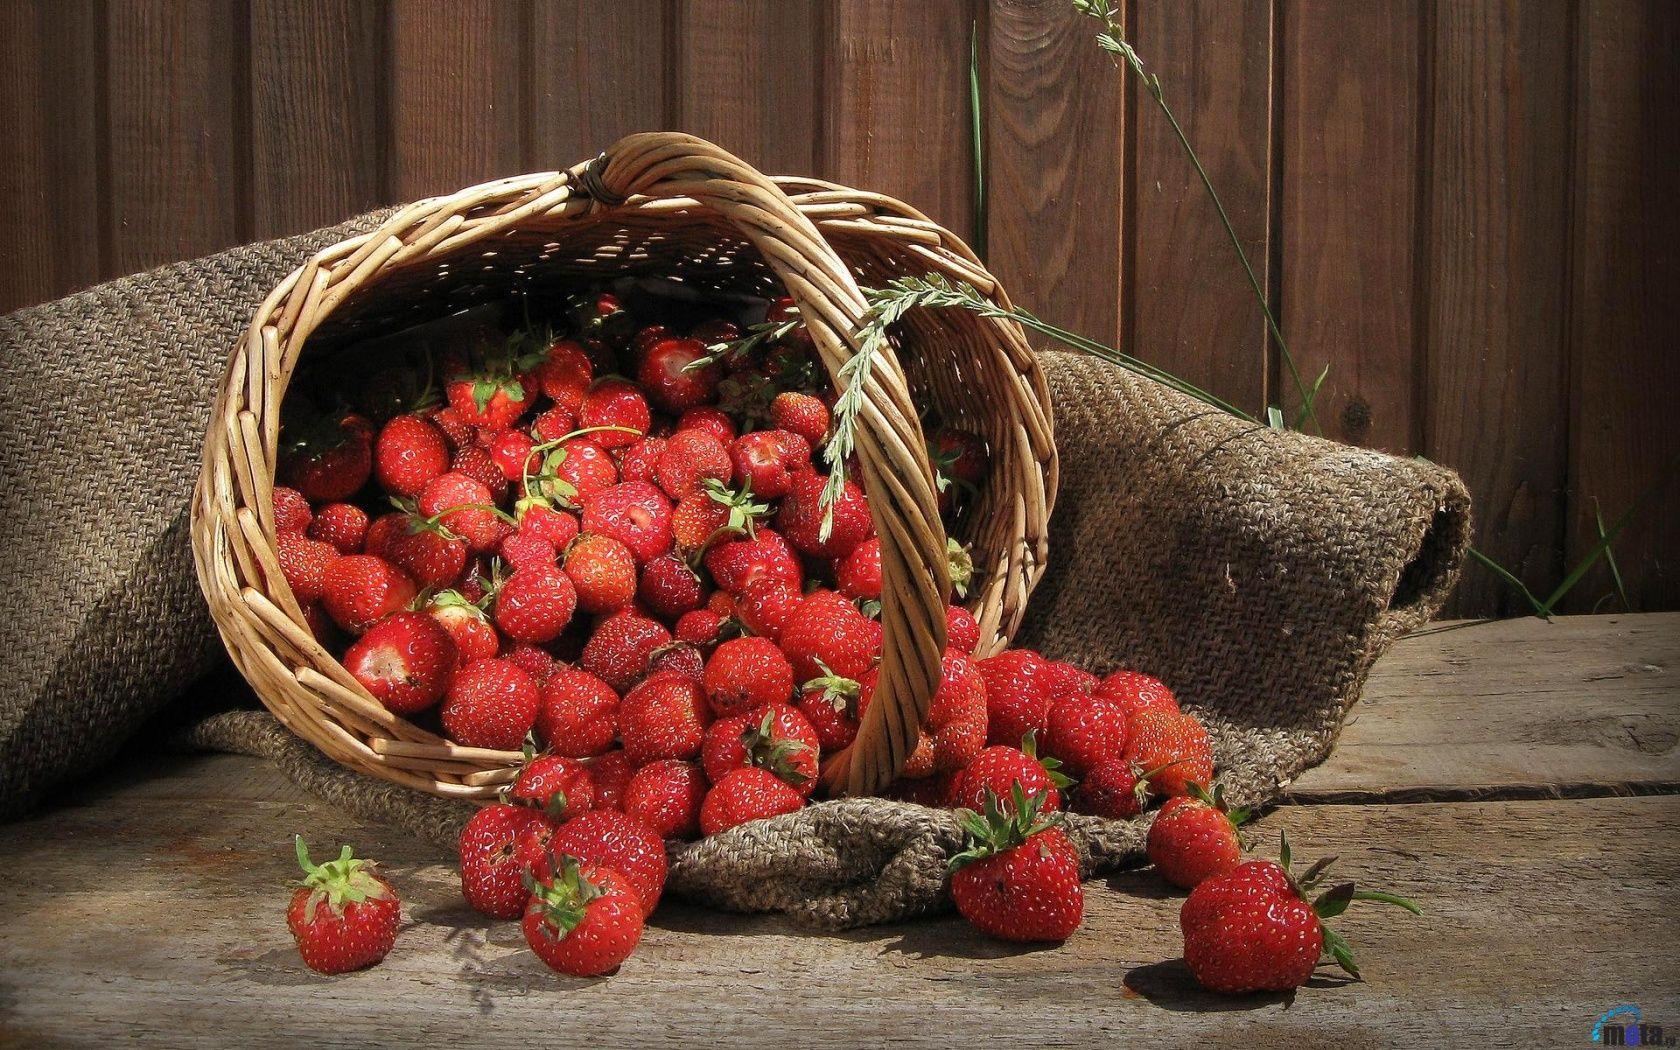 Strawberry Fruits Wallpaper in jpg format for free download